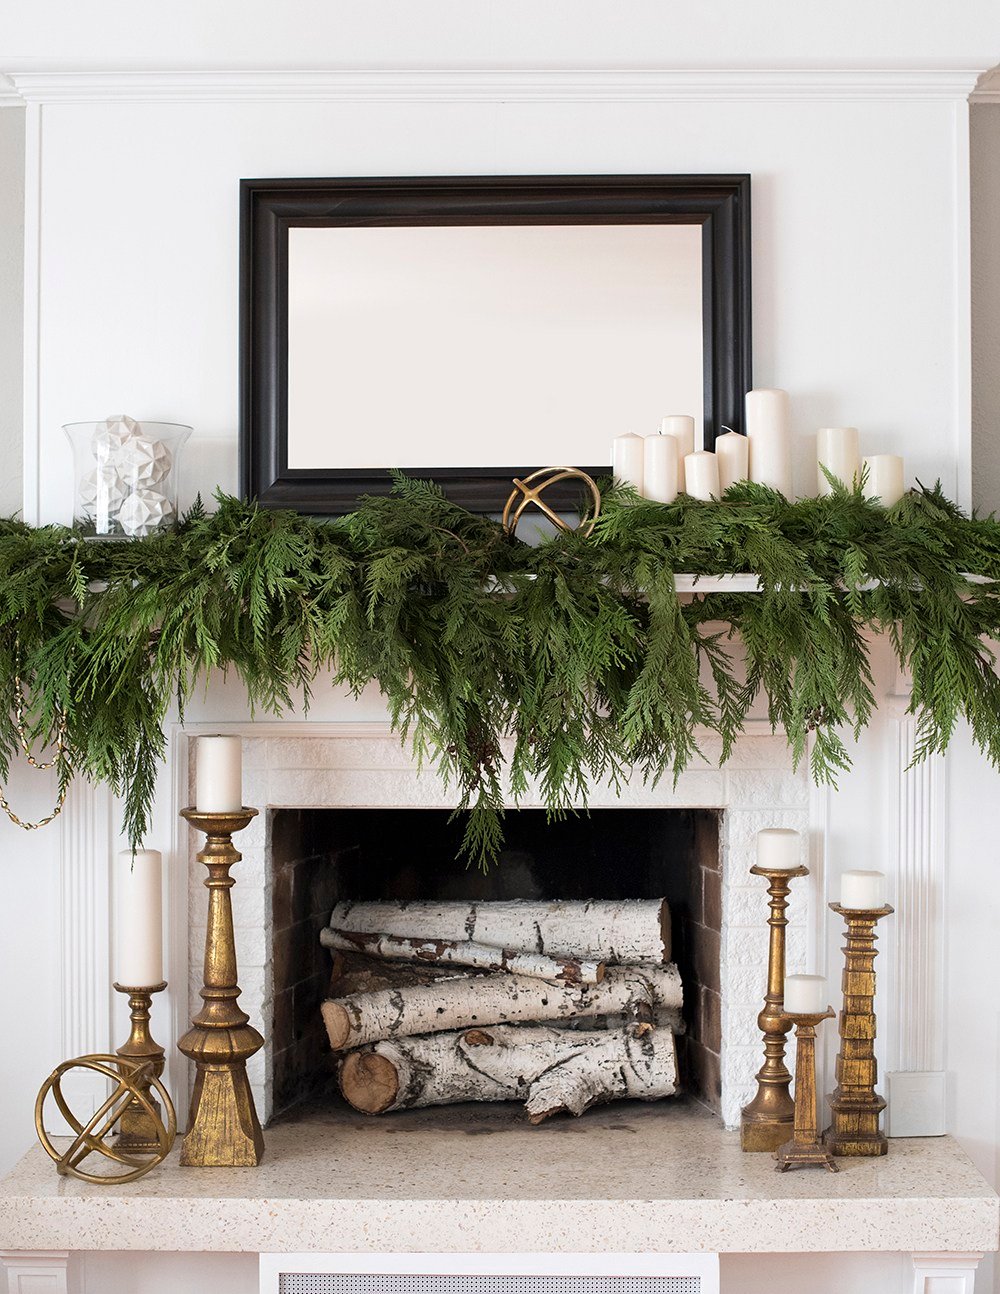 10 Holiday Posts To Inspire & Bring Cheer (...A Bit Early) - roomfortuesday.com